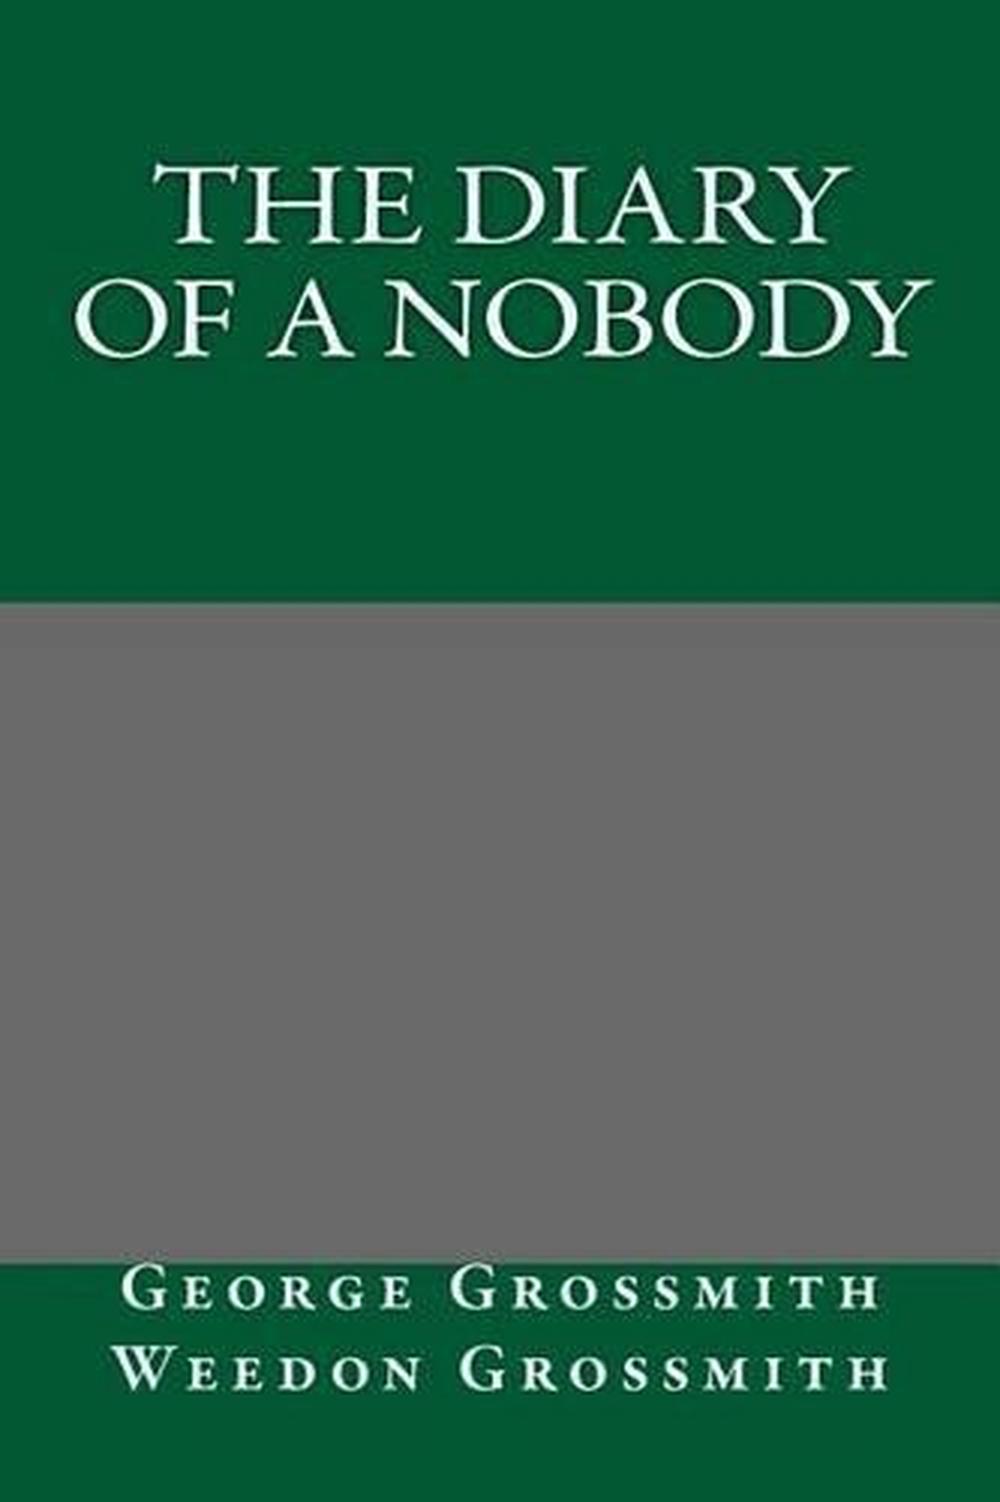 the diary of a nobody book